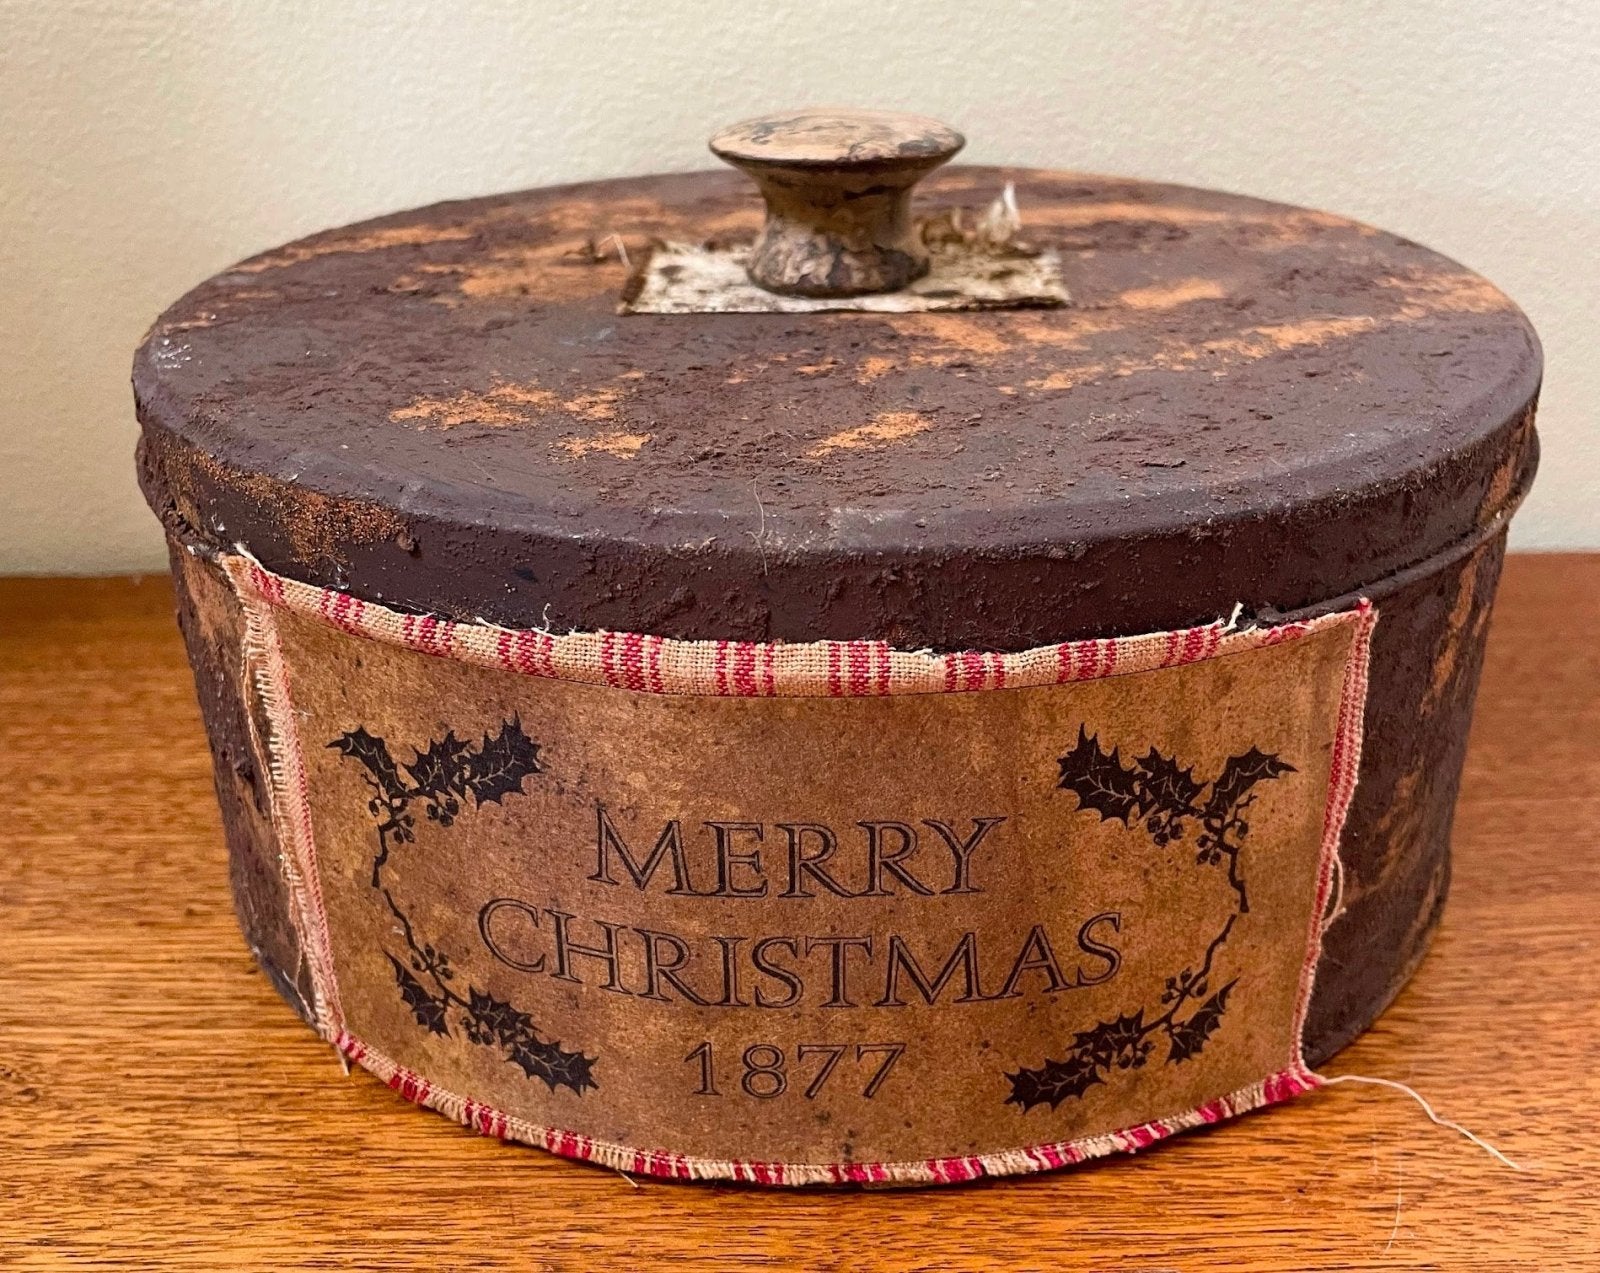 Primitive Colonial Handcrafted 1887 Merry Christmas Tin - The Primitive Pineapple Collection